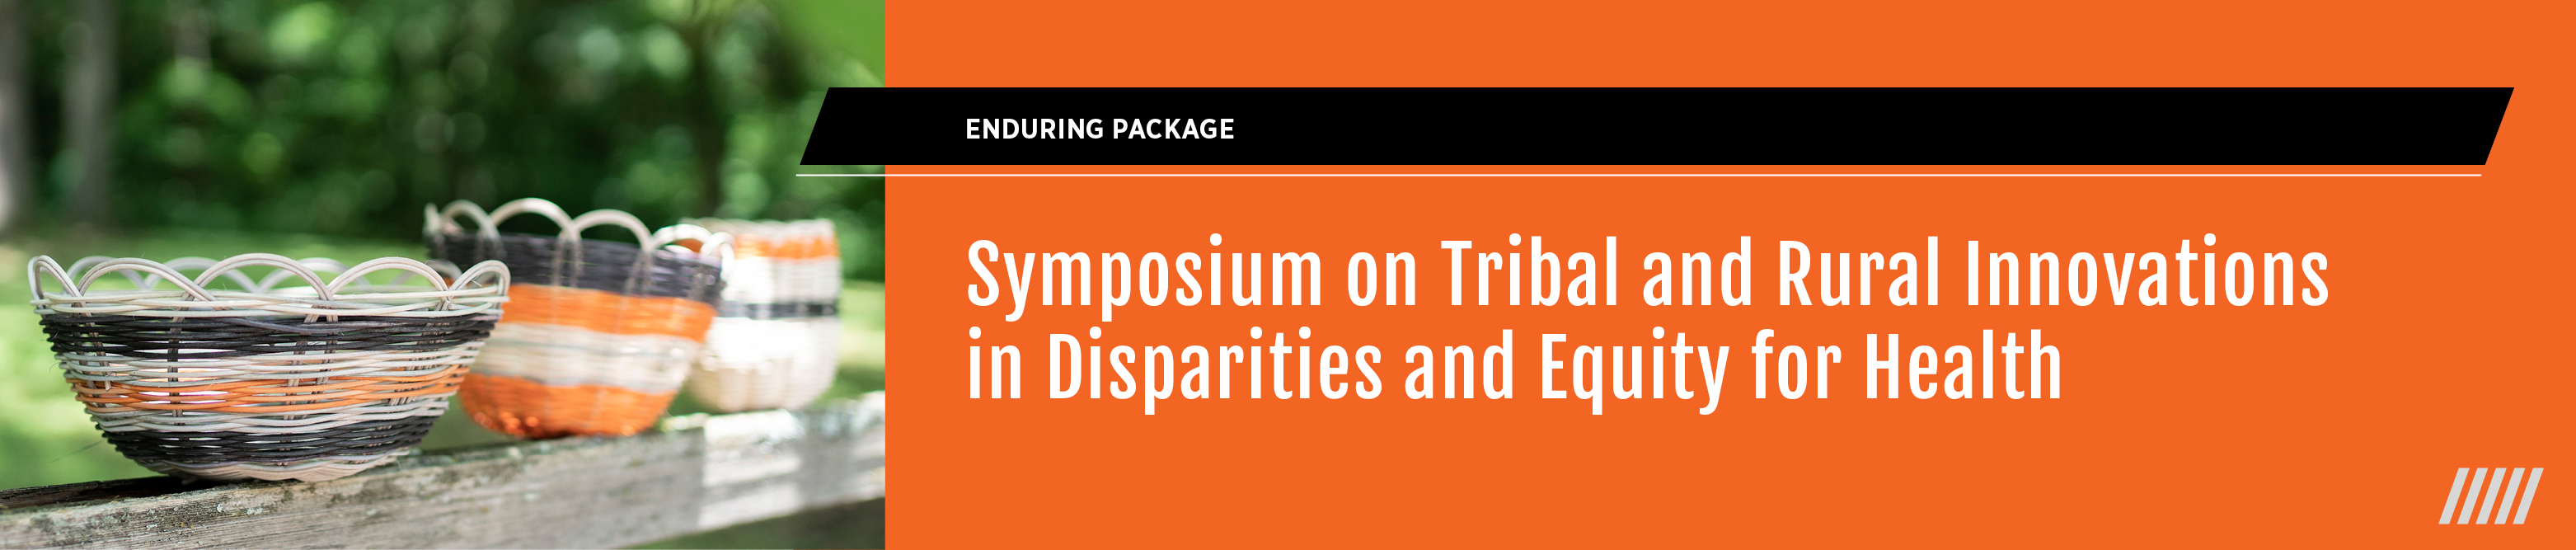 2023 Symposium on Tribal and Rural Innovation in Disparities and Equity for Health (STRIDE) - Enduring Package Banner